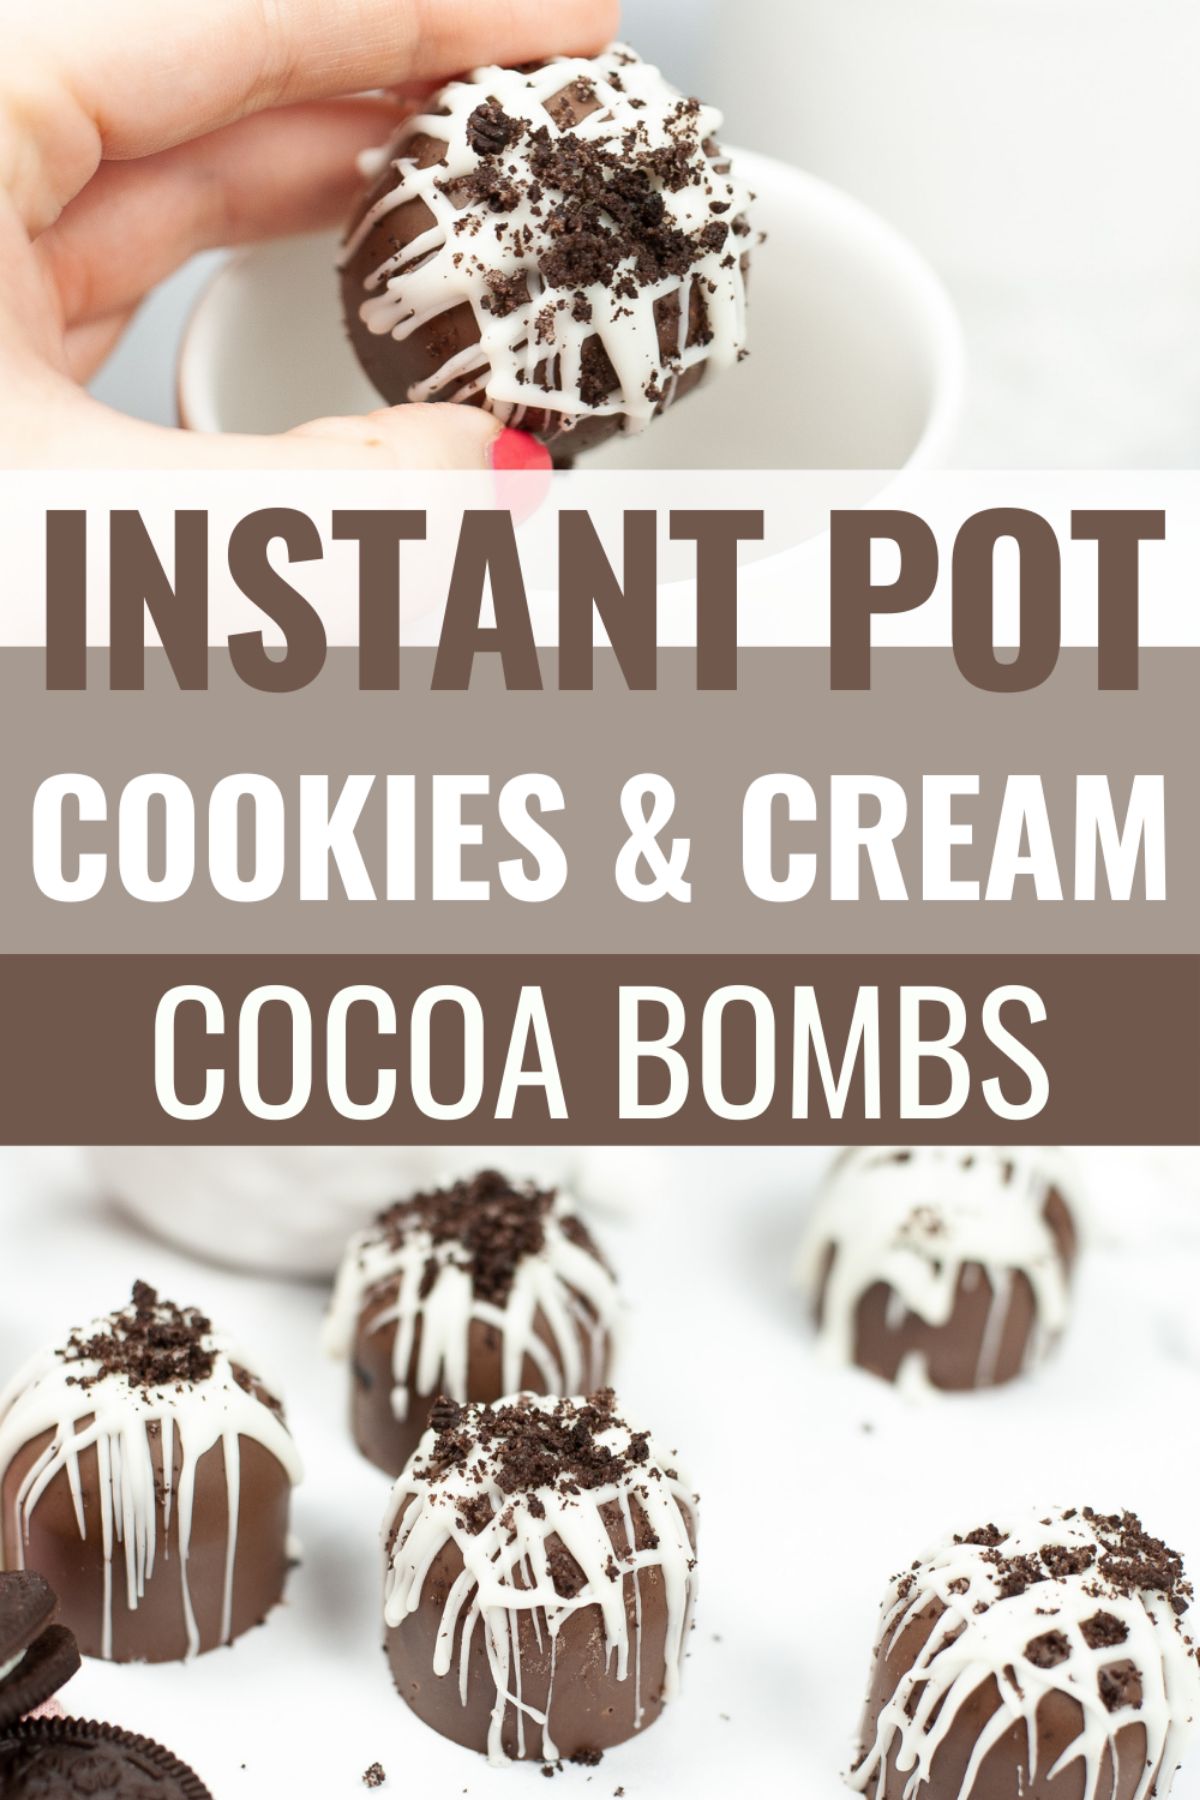 Cookies and Cream Hot Cocoa Bombs are easy to make and result in a creamy and flavorful cup of hot cocoa. A warm pick me up on a cool day! #cookiesandcream #hotcocoabomb #hotcocoa #recipe #winter via @wondermomwannab